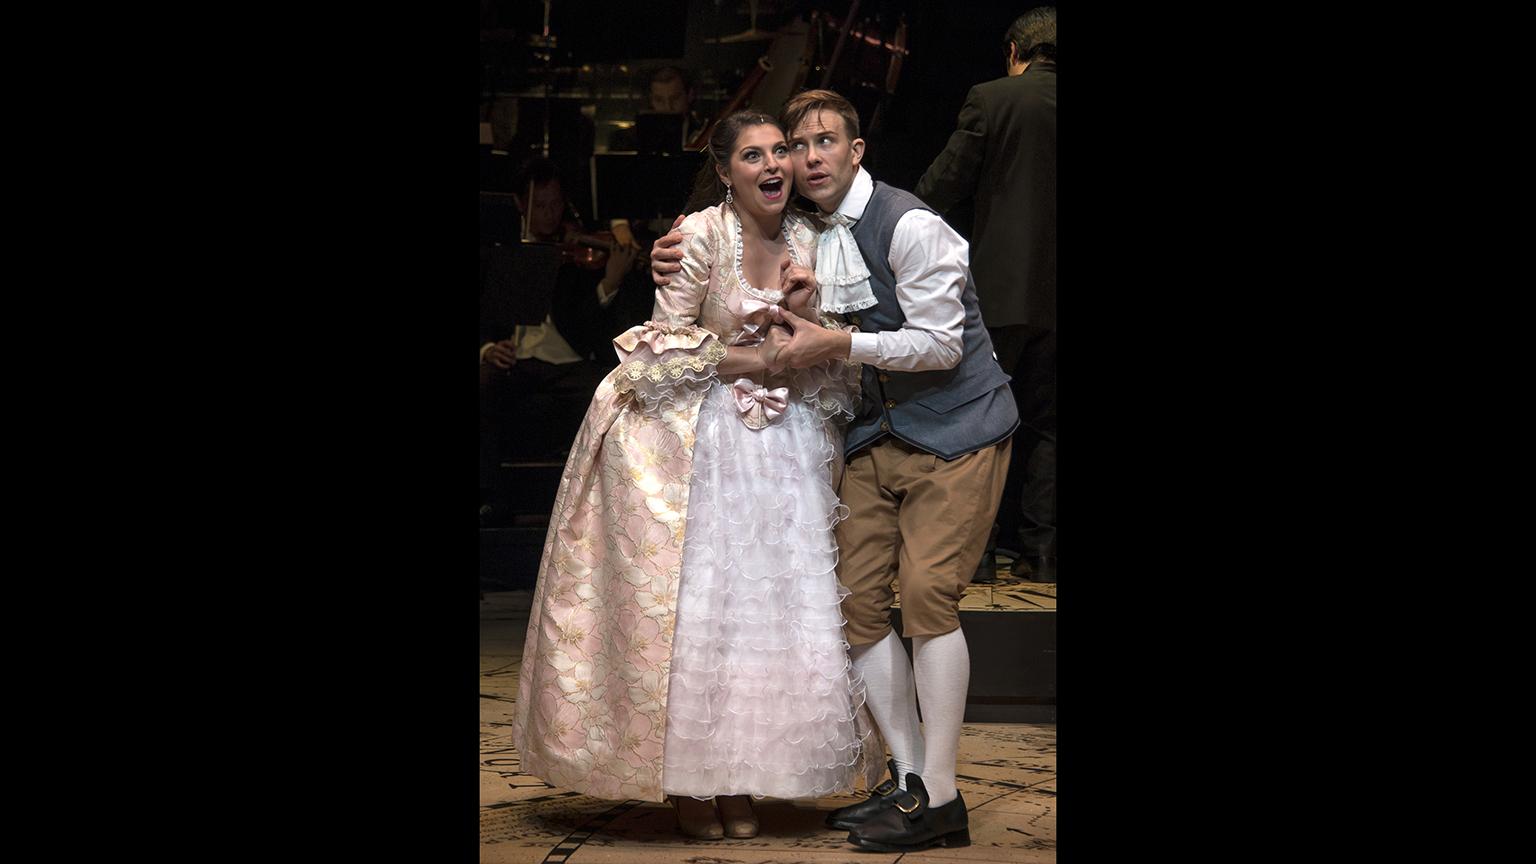 Cecilia Iole and James Onstad in “Candide.” (Photo by Brynn Yeager)